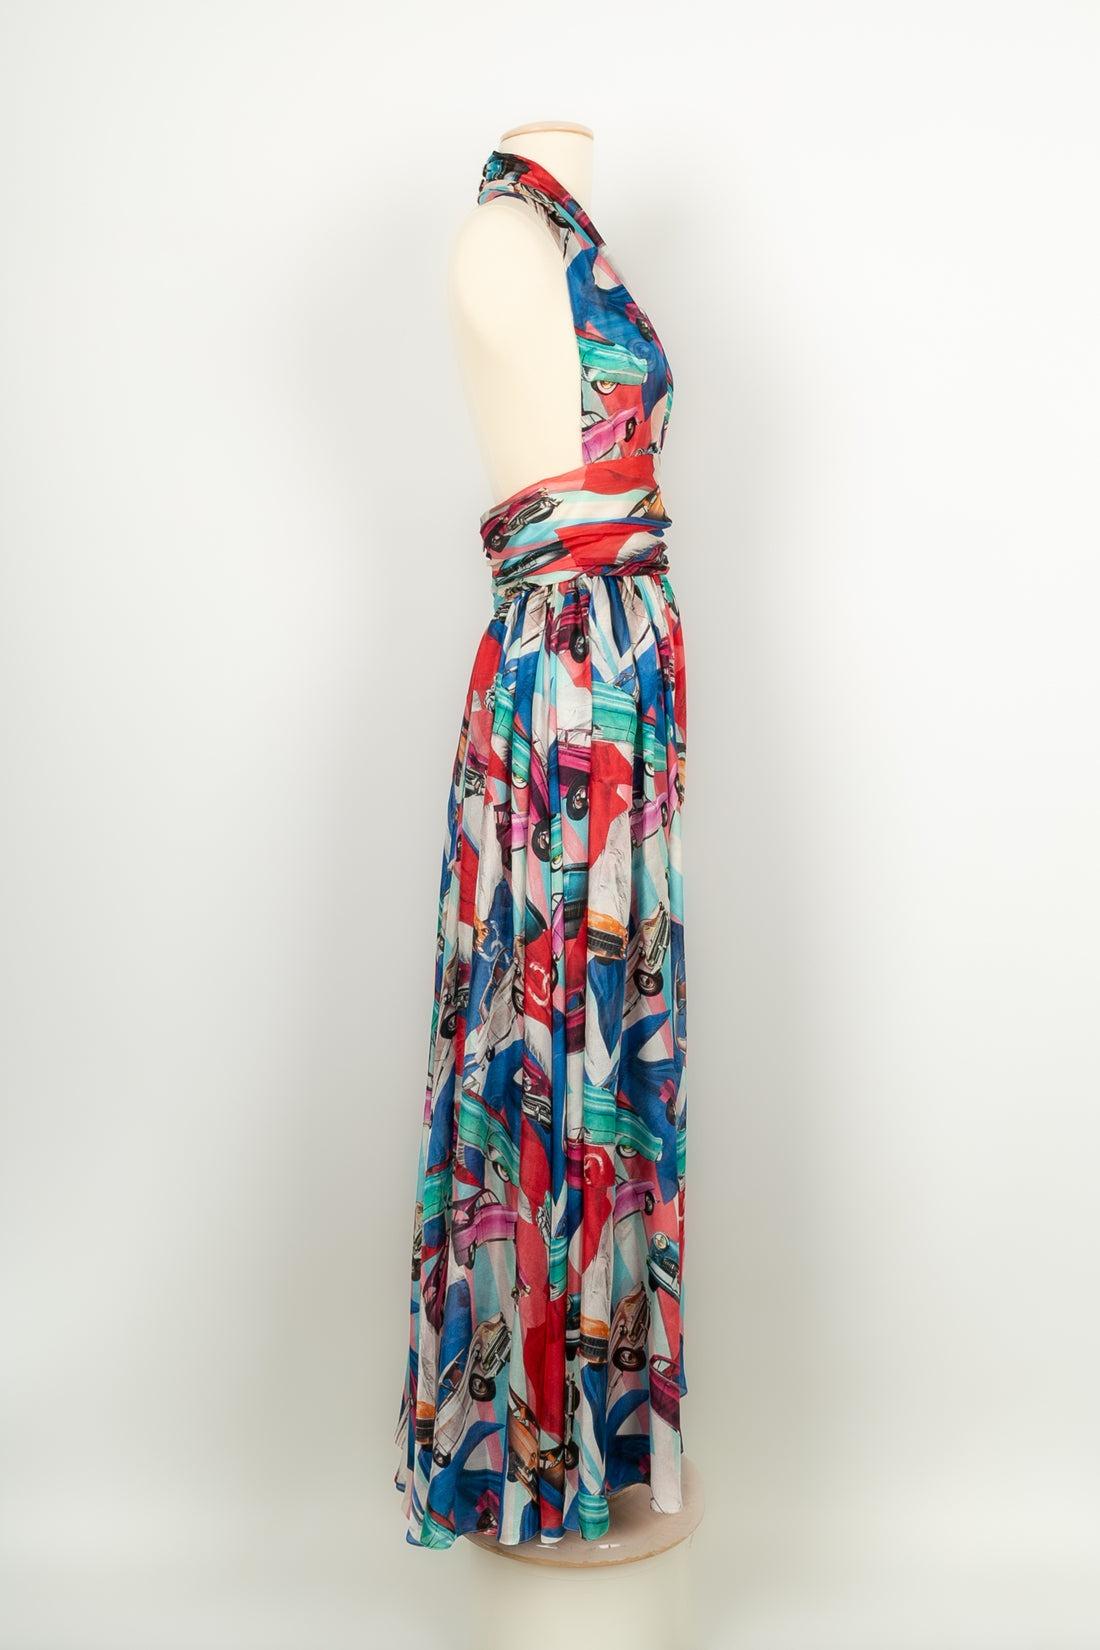 Chanel - (Made in France) Long silk dress in red, blue, and green tones. Size 34FR. Paris-Cuba Cruise 2017 Collection.

Additional information:
Condition: Very good condition
Dimensions: Waist: 32 cm - Length: 136 cm
Period: 21st Century

Seller